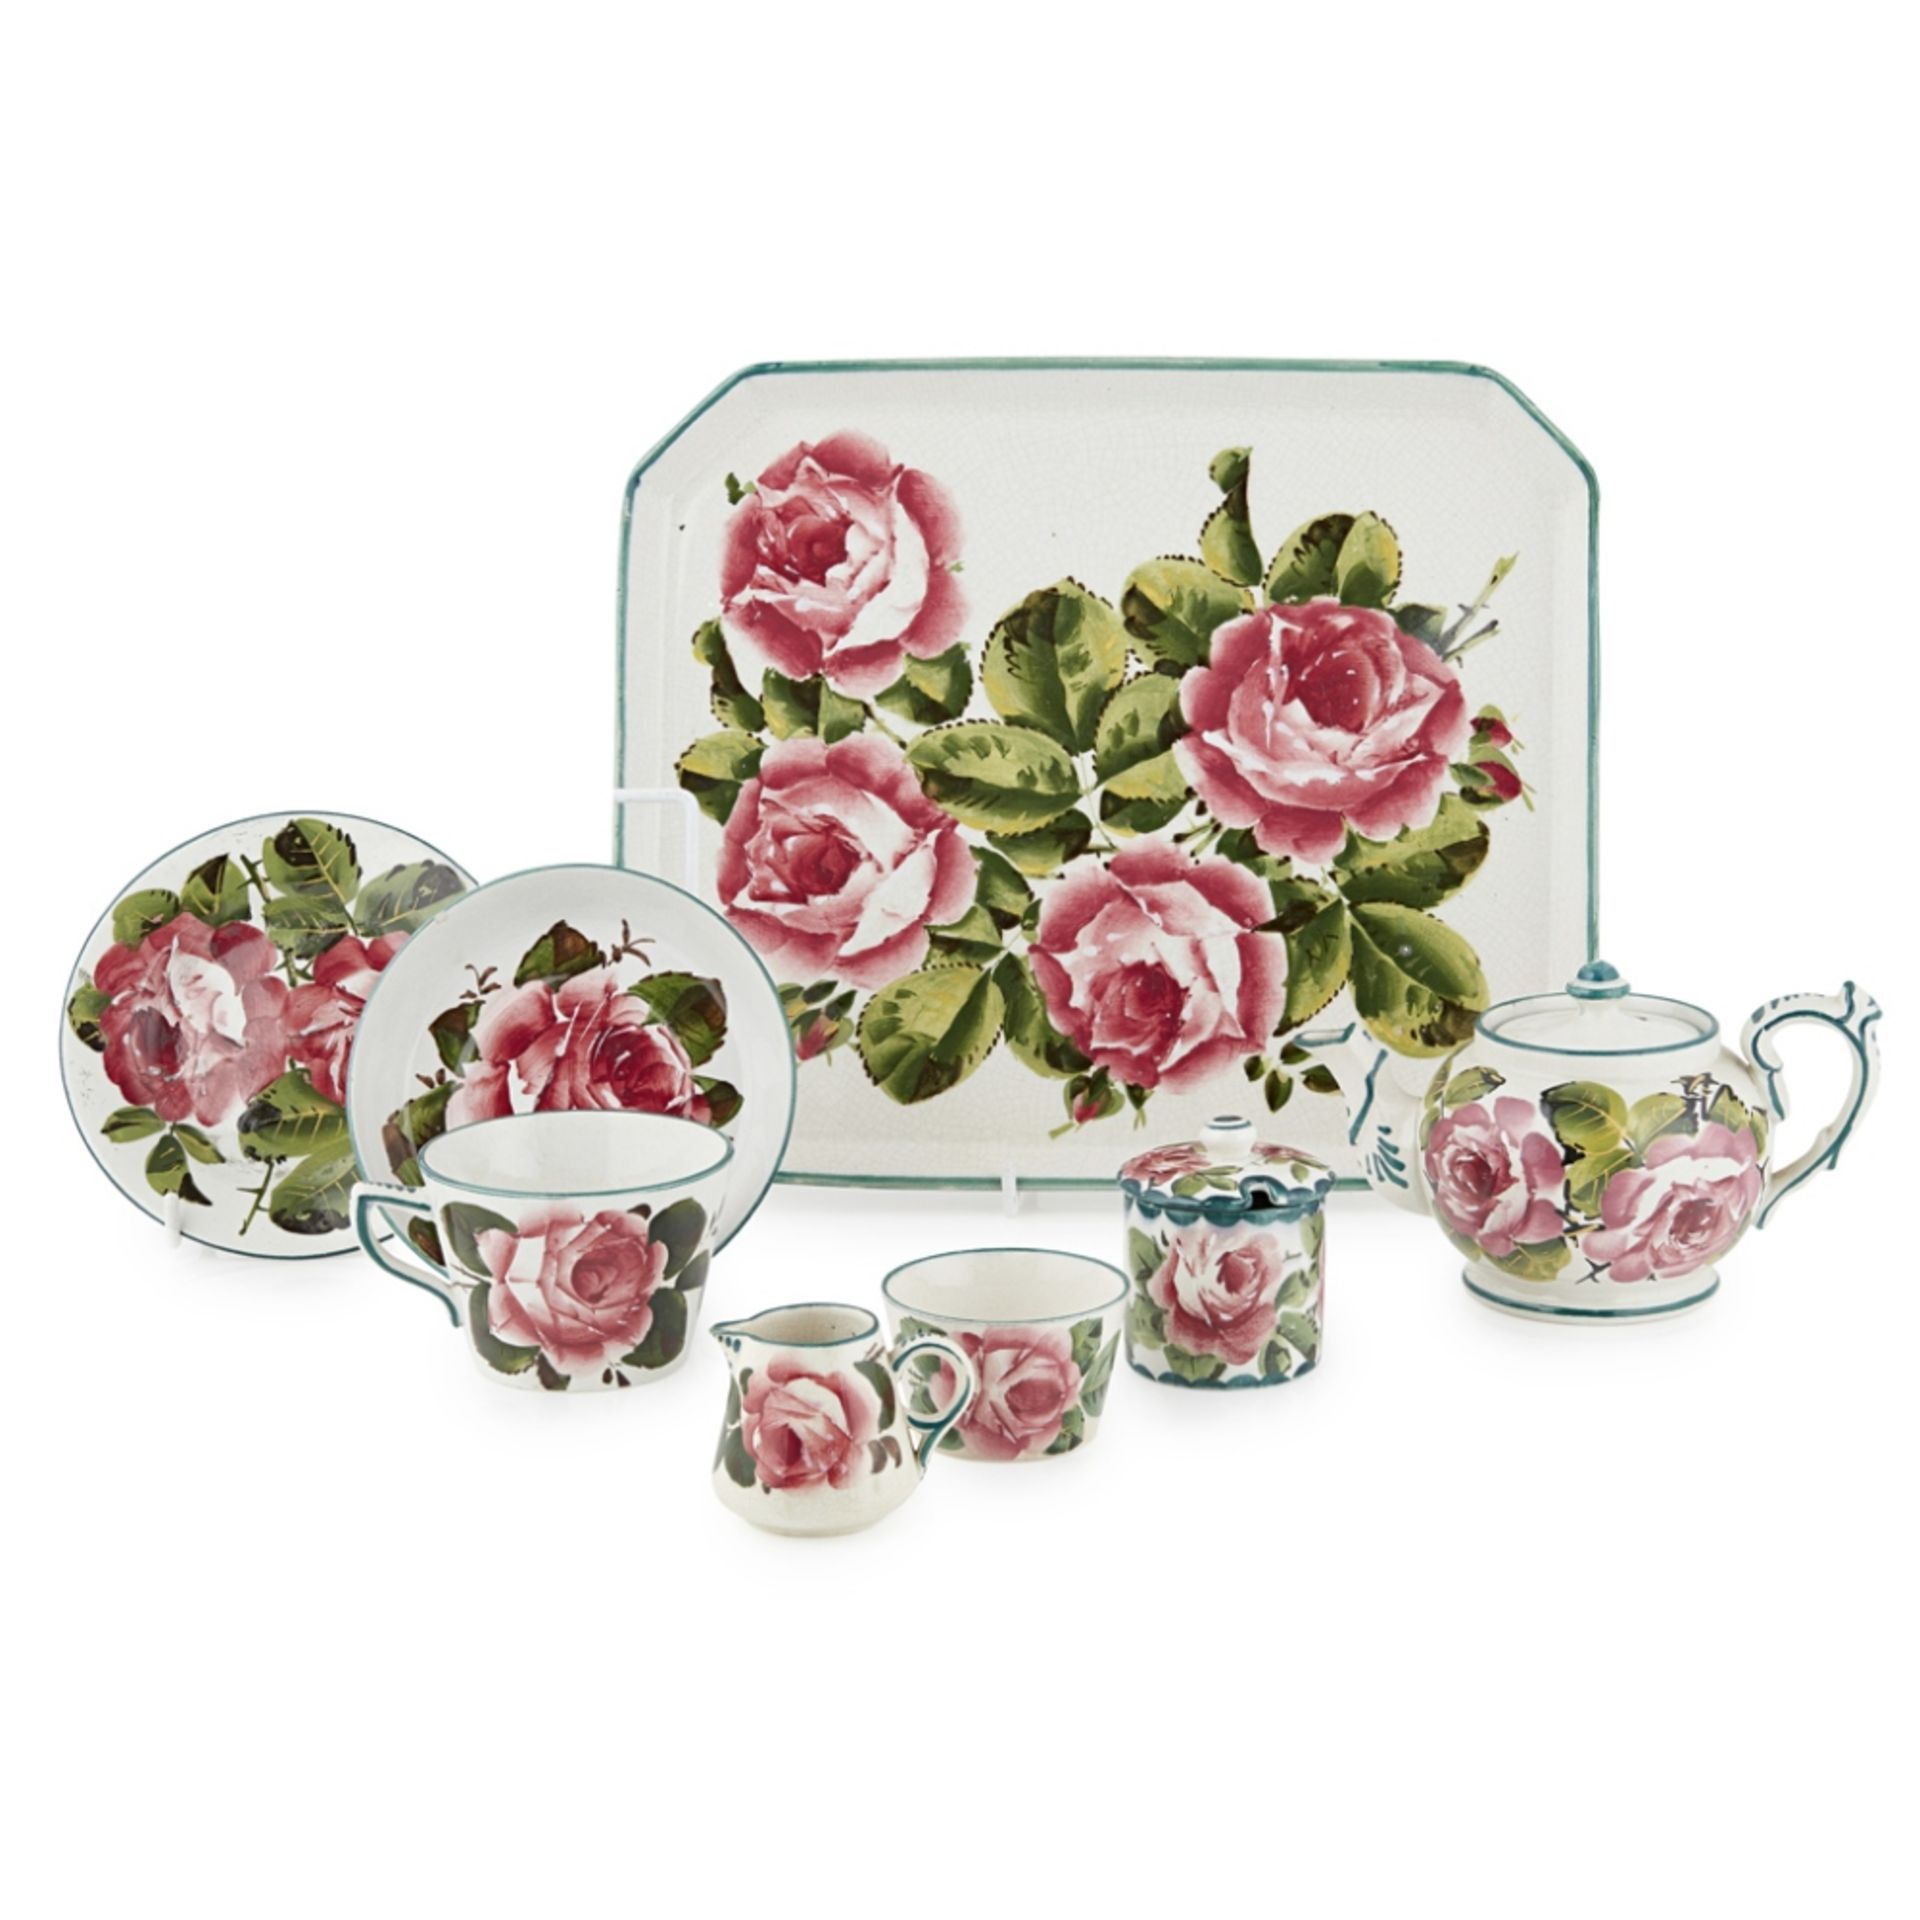 WEMYSS WARE 'CABBAGE ROSES' MATCHED TEA SERVICE, EARLY 20TH CENTURY comprising a TEAPOT, 11.5cm